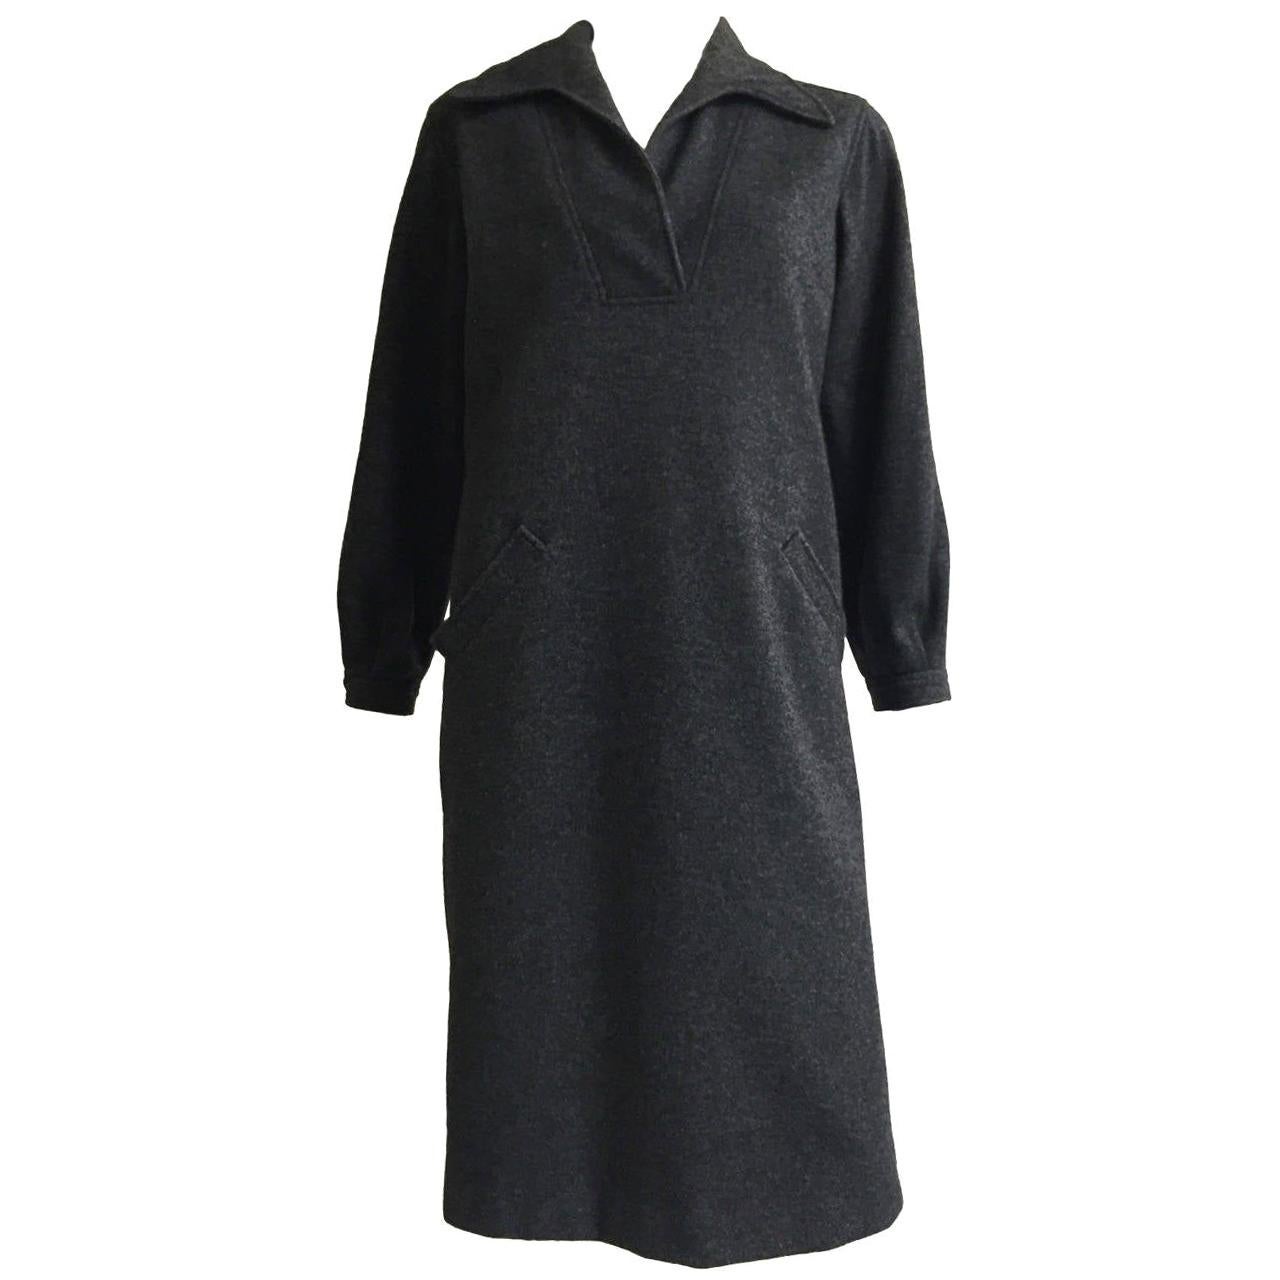 Halston 1970s Gray Wool Dress with Pockets size 6/8. For Sale